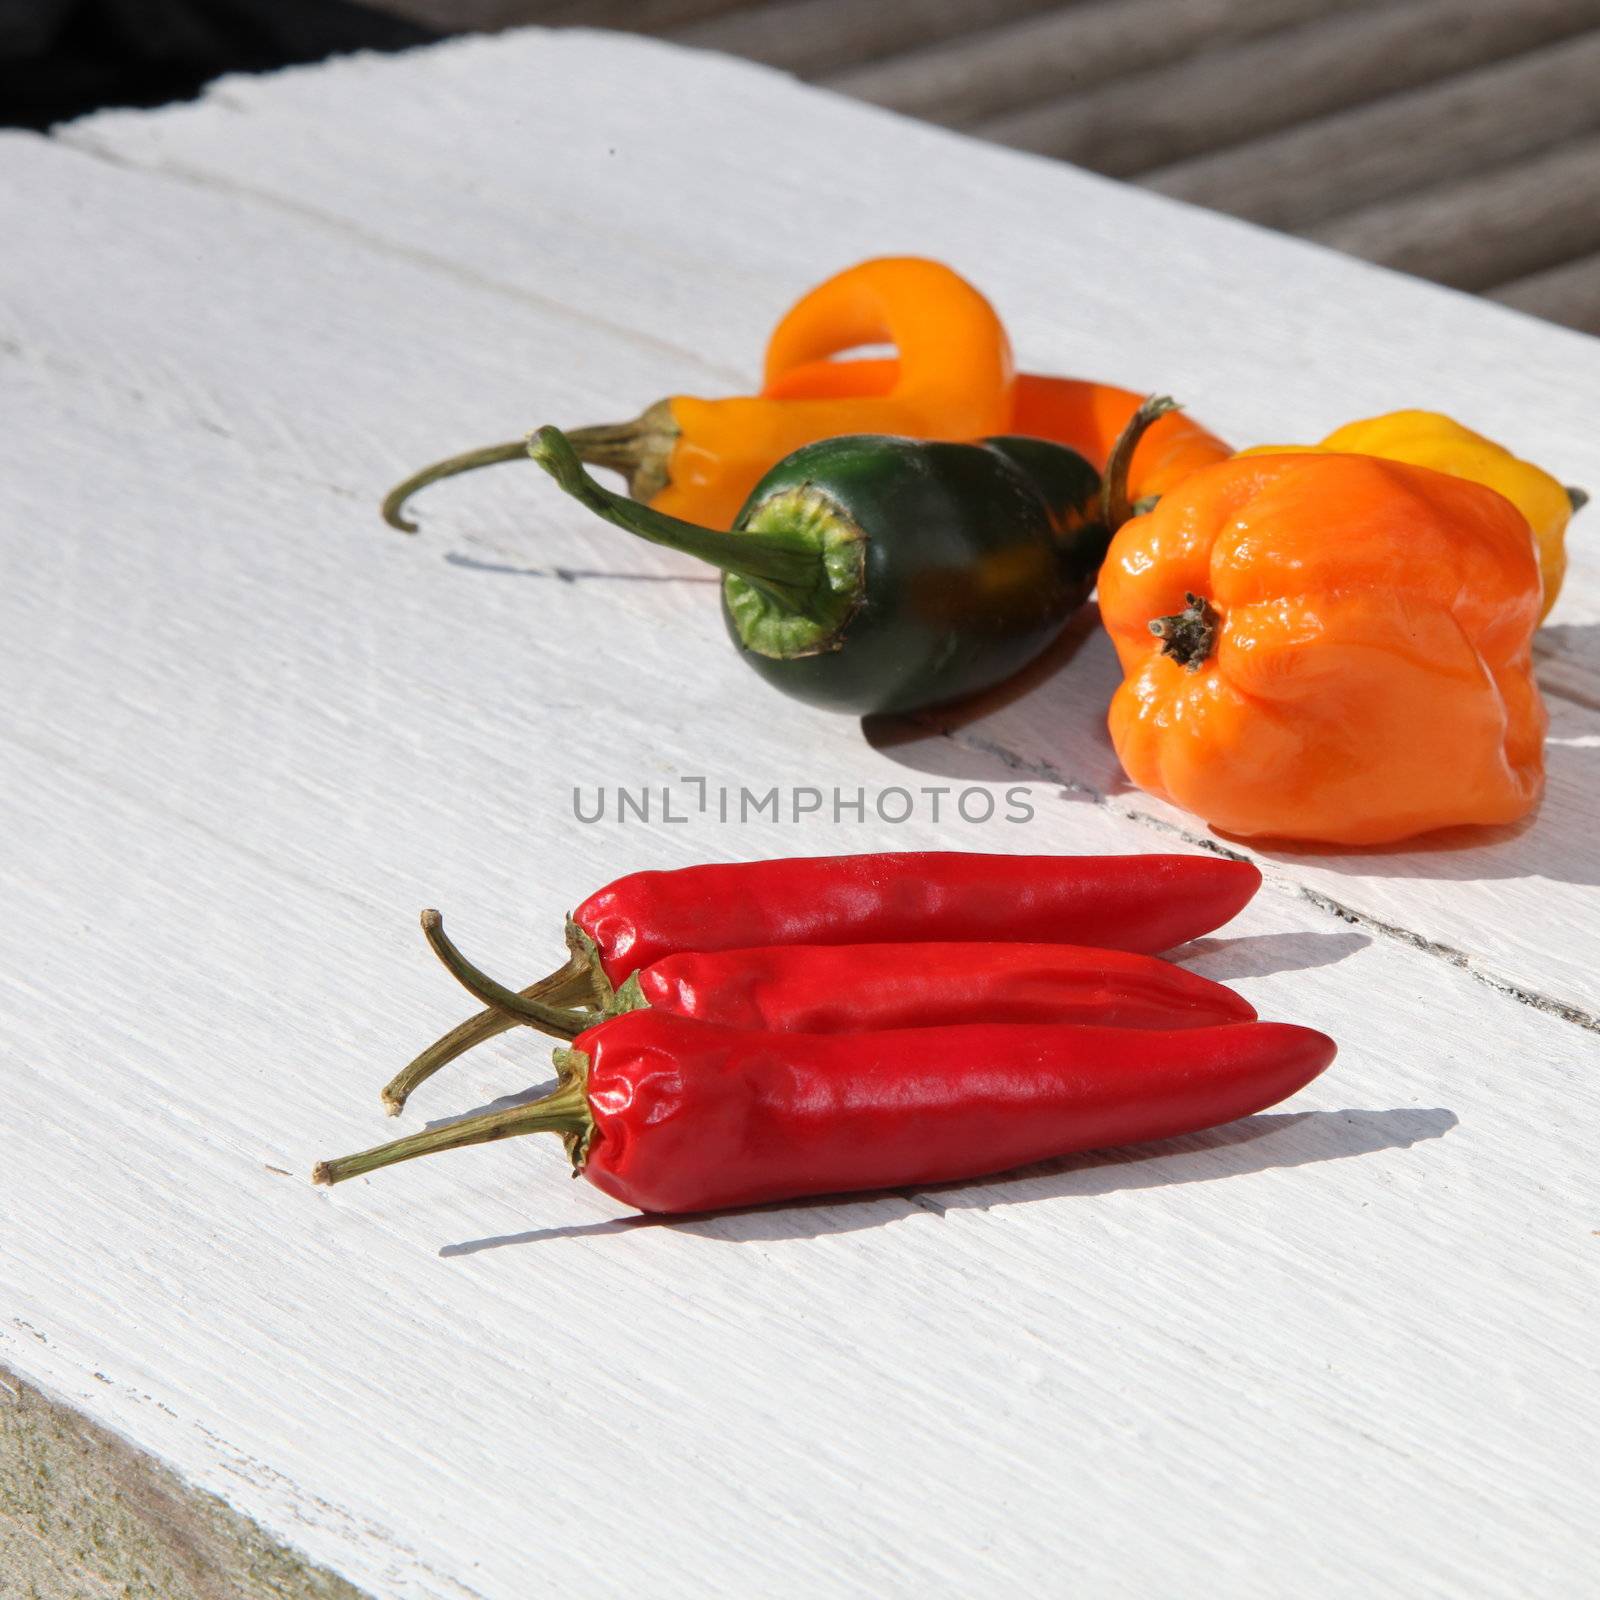 Red hot chilli peppers by Farina6000